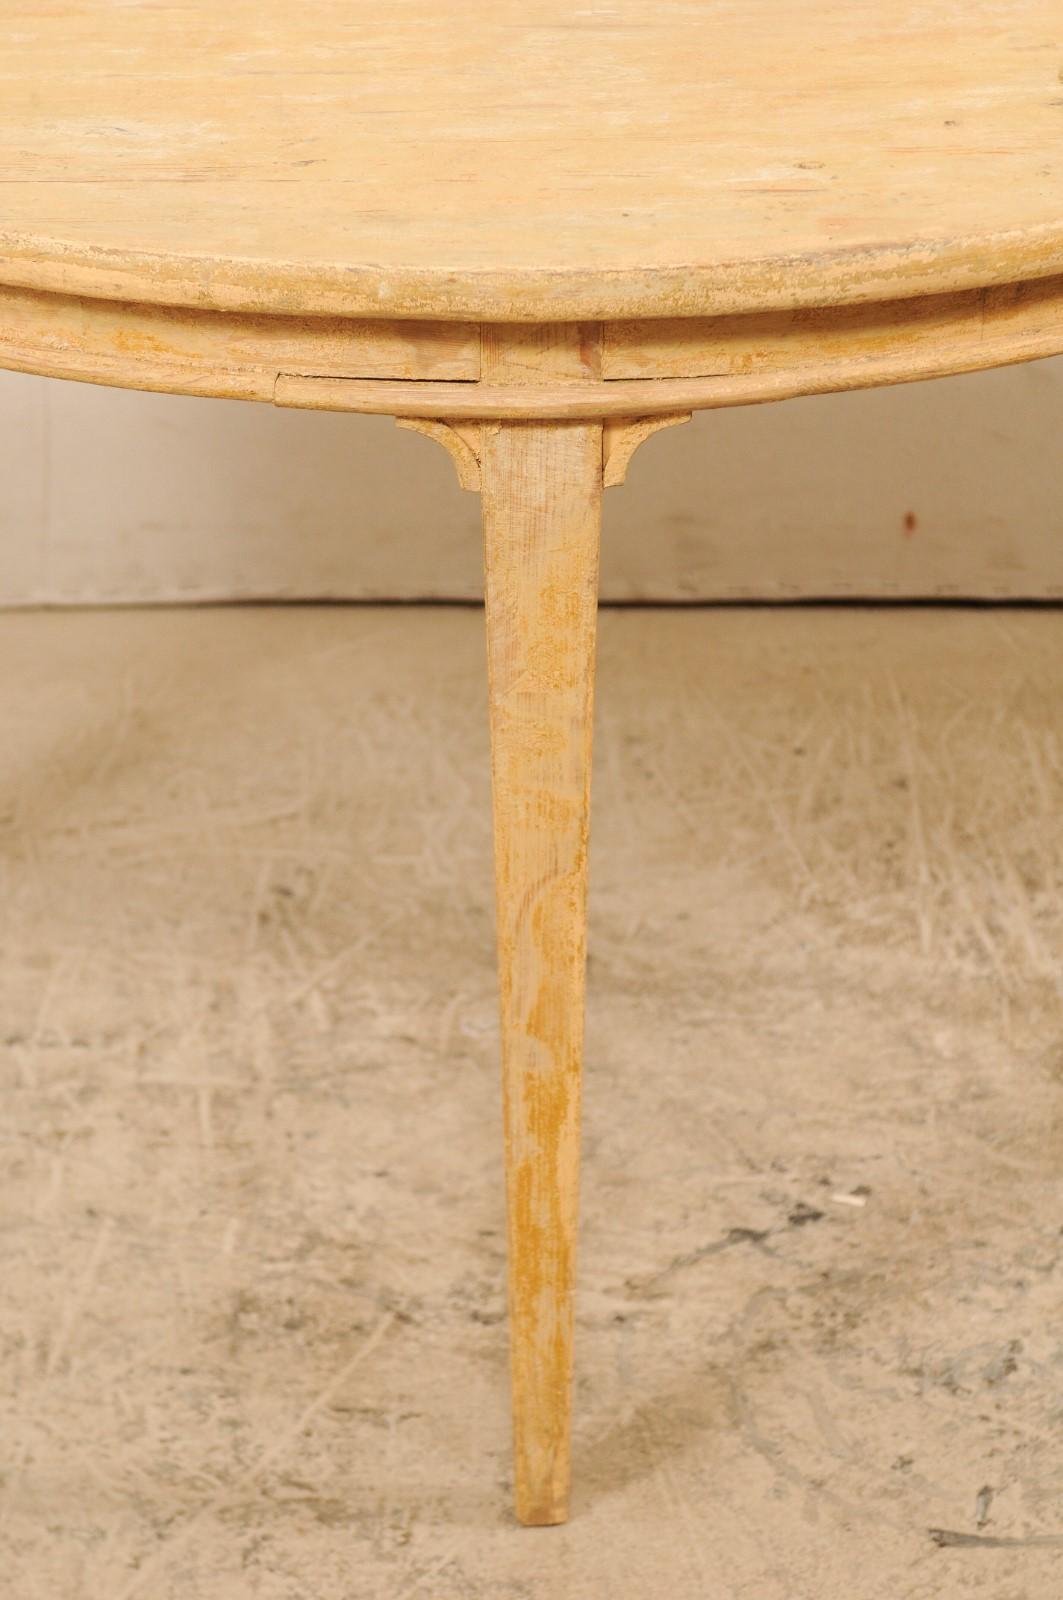 Single Swedish Demilune Light Wood Table from the 19th Century 5